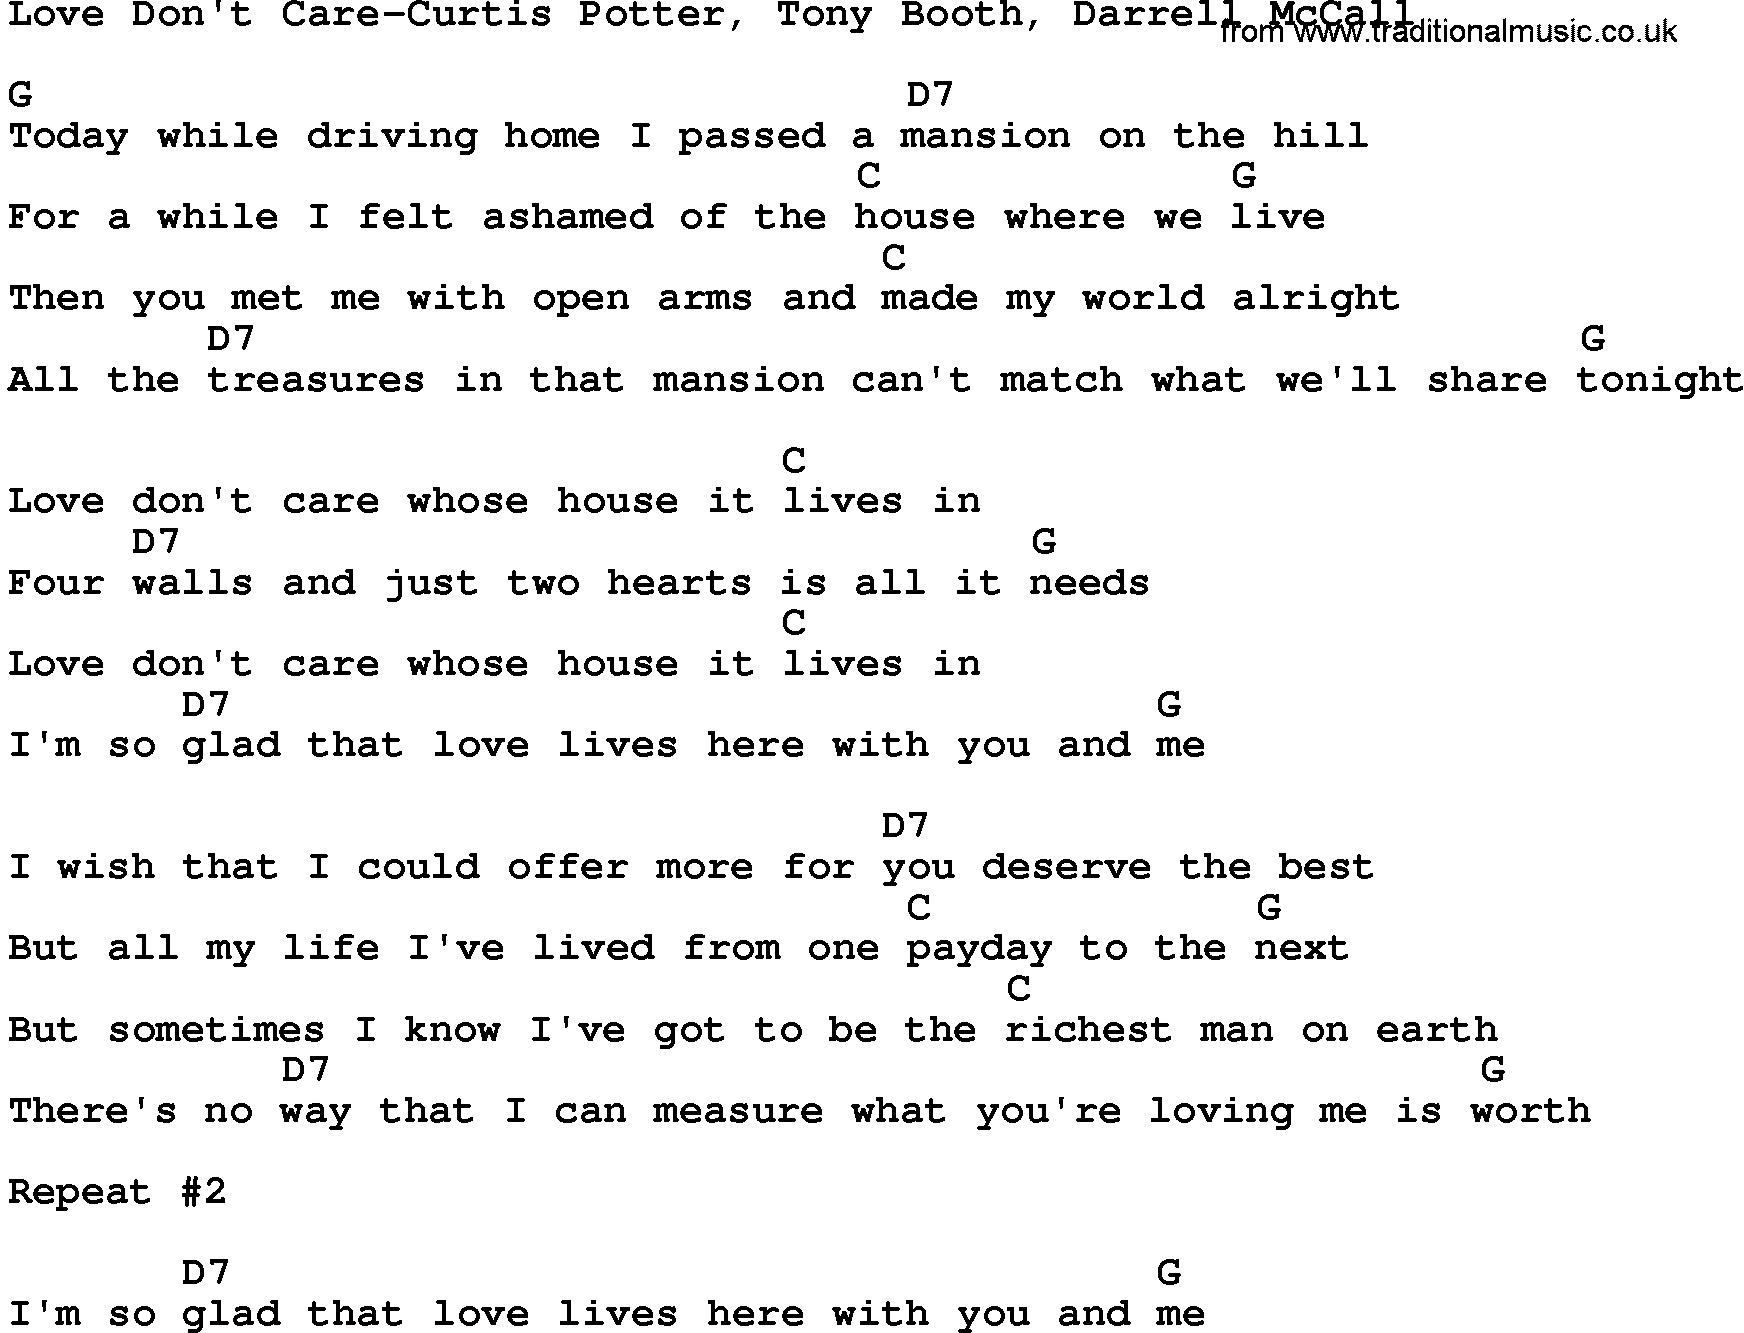 Country music song: Love Don't Care-Curtis Potter, Tony Booth, Darrell Mccall lyrics and chords